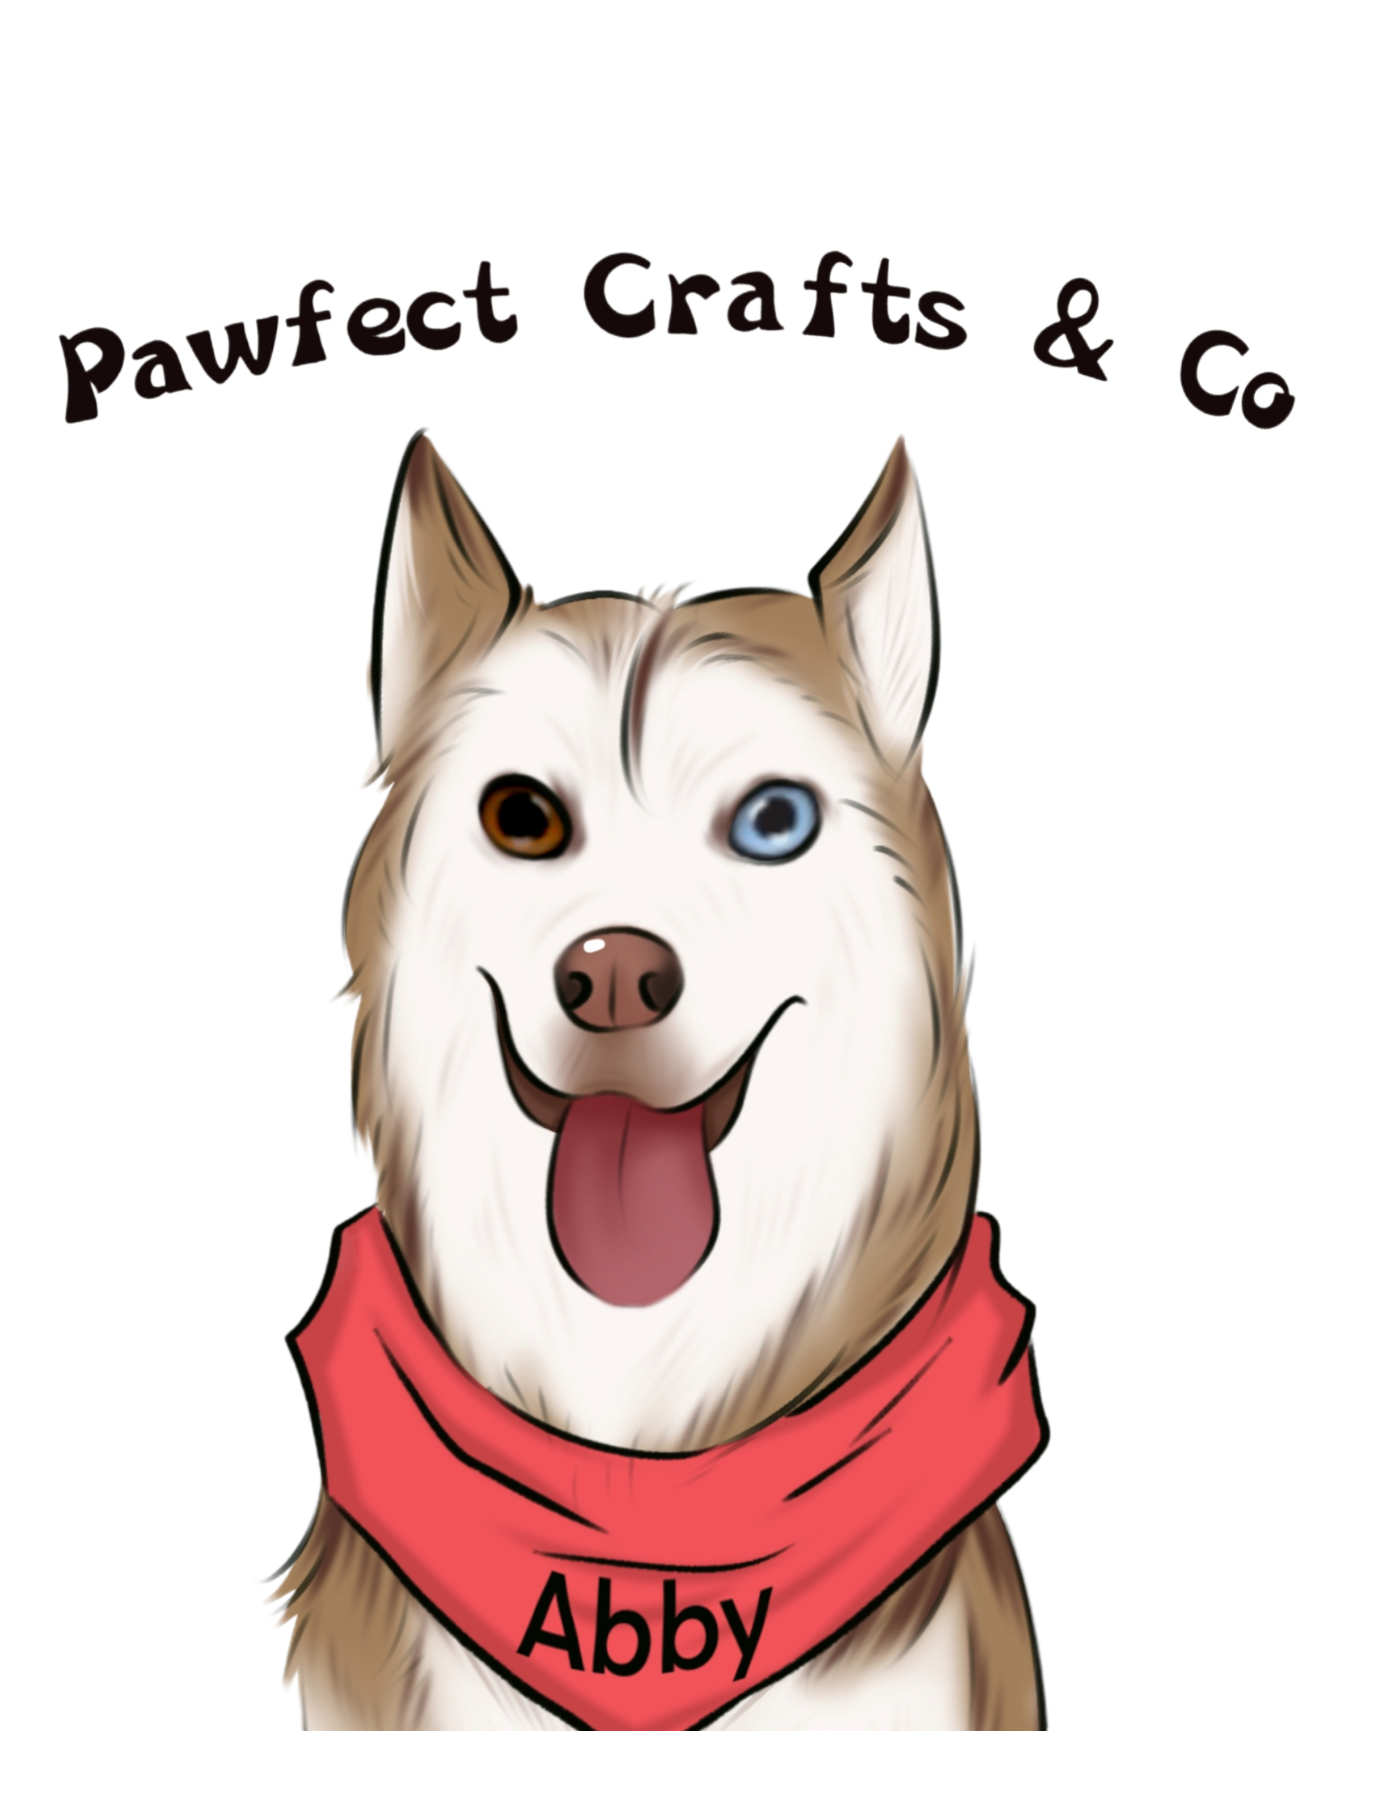 Pawfect Crafts & Co